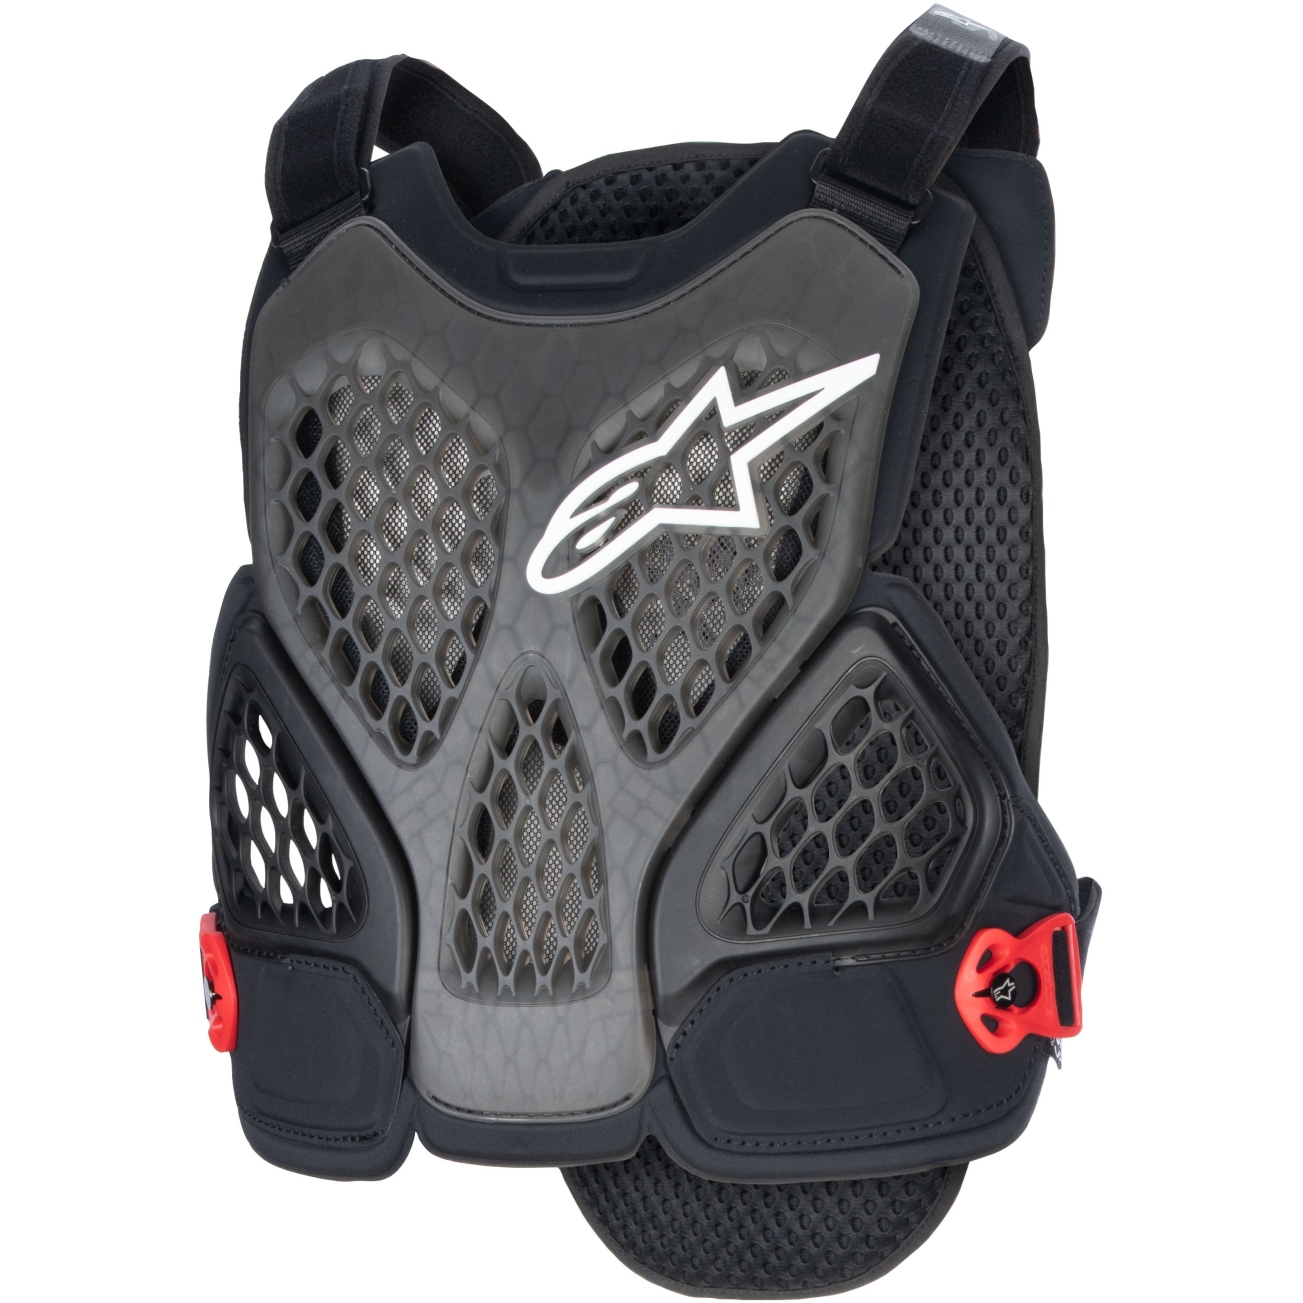 Picture of Alpinestars A-6 Plasma Chest Protector - black/anthracite/red